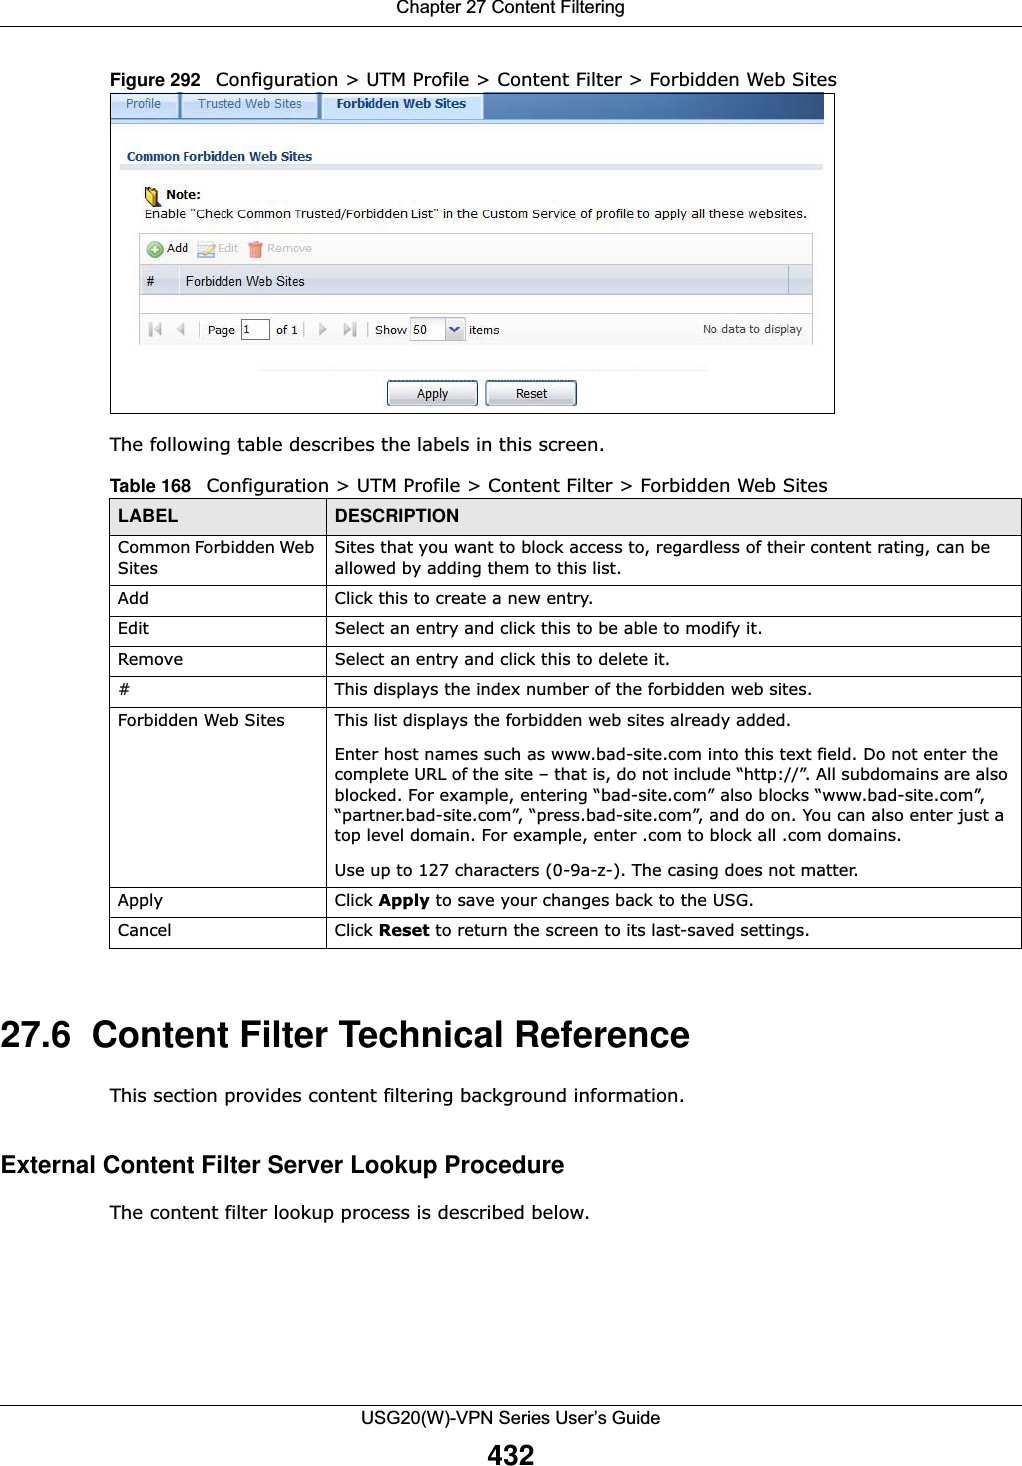 Chapter 27 Content FilteringUSG20(W)-VPN Series User’s Guide432Figure 292   Configuration &gt; UTM Profile &gt; Content Filter &gt; Forbidden Web Sites The following table describes the labels in this screen.  27.6  Content Filter Technical ReferenceThis section provides content filtering background information.External Content Filter Server Lookup ProcedureThe content filter lookup process is described below. Table 168   Configuration &gt; UTM Profile &gt; Content Filter &gt; Forbidden Web SitesLABEL DESCRIPTIONCommon Forbidden Web SitesSites that you want to block access to, regardless of their content rating, can be allowed by adding them to this list. Add Click this to create a new entry. Edit Select an entry and click this to be able to modify it. Remove Select an entry and click this to delete it. # This displays the index number of the forbidden web sites.Forbidden Web Sites This list displays the forbidden web sites already added.Enter host names such as www.bad-site.com into this text field. Do not enter the complete URL of the site – that is, do not include “http://”. All subdomains are also blocked. For example, entering “bad-site.com” also blocks “www.bad-site.com”, “partner.bad-site.com”, “press.bad-site.com”, and do on. You can also enter just a top level domain. For example, enter .com to block all .com domains. Use up to 127 characters (0-9a-z-). The casing does not matter.Apply Click Apply to save your changes back to the USG.Cancel Click Reset to return the screen to its last-saved settings. 